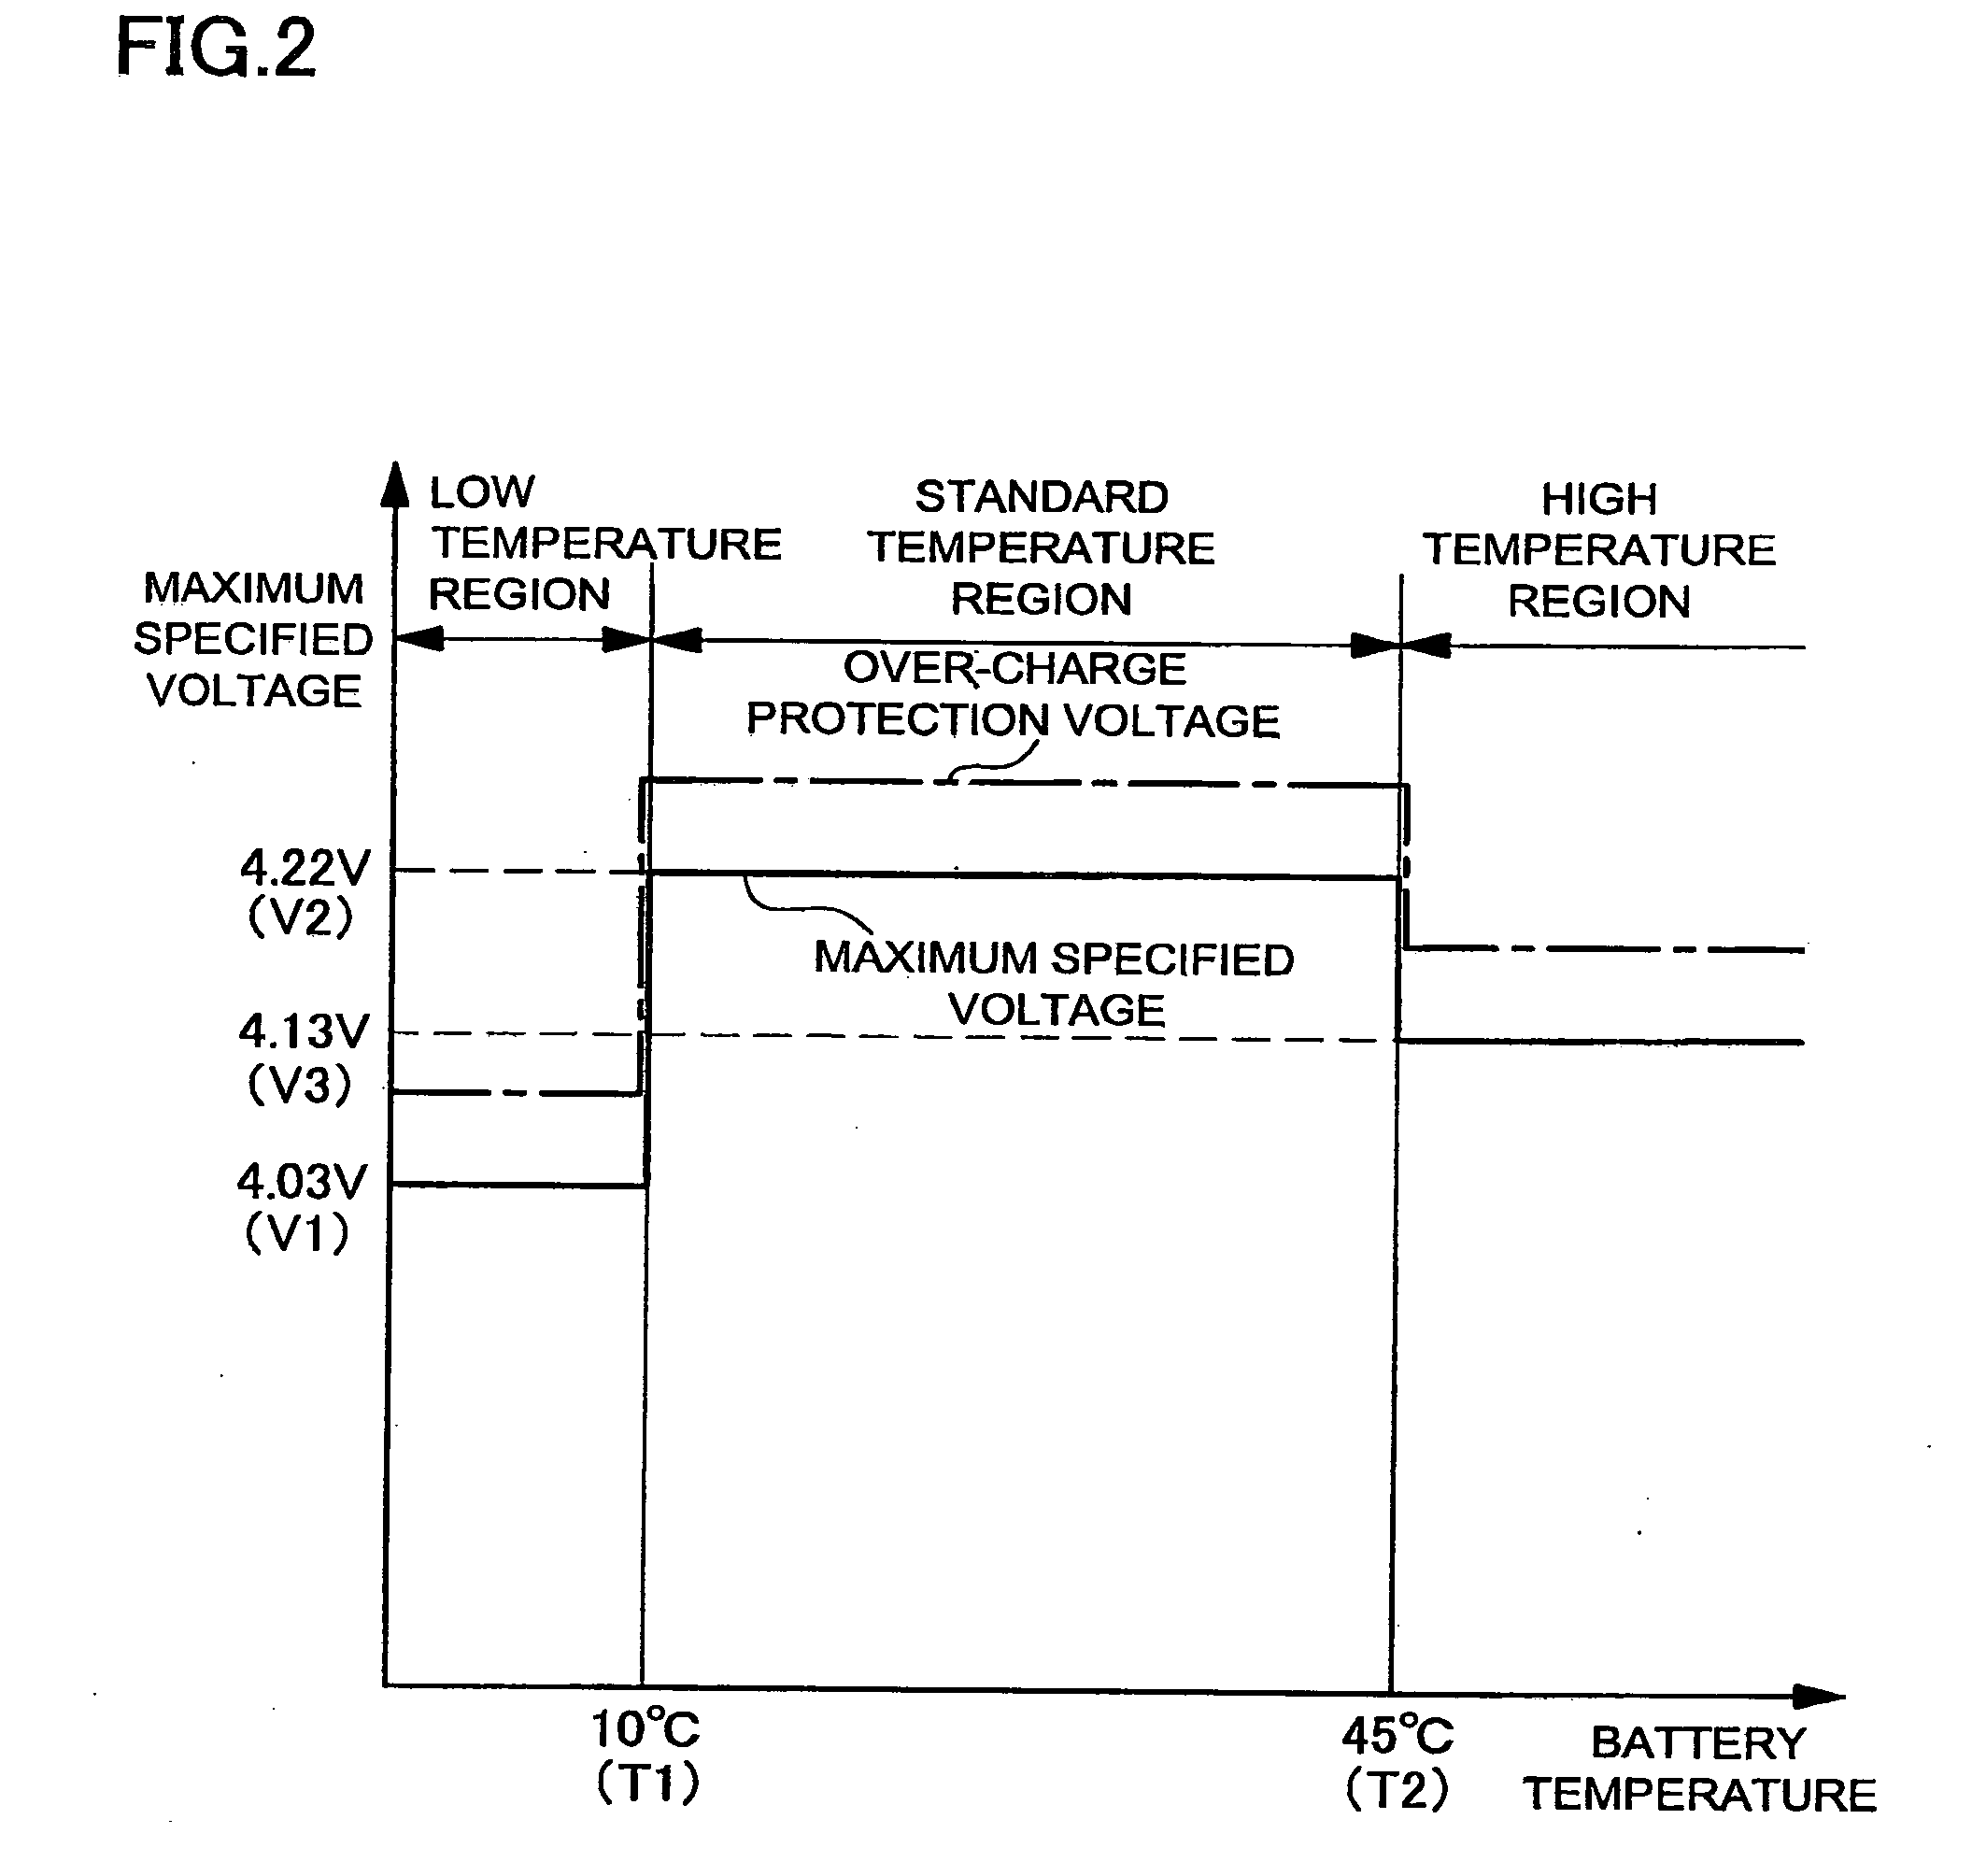 Method of charging a battery array